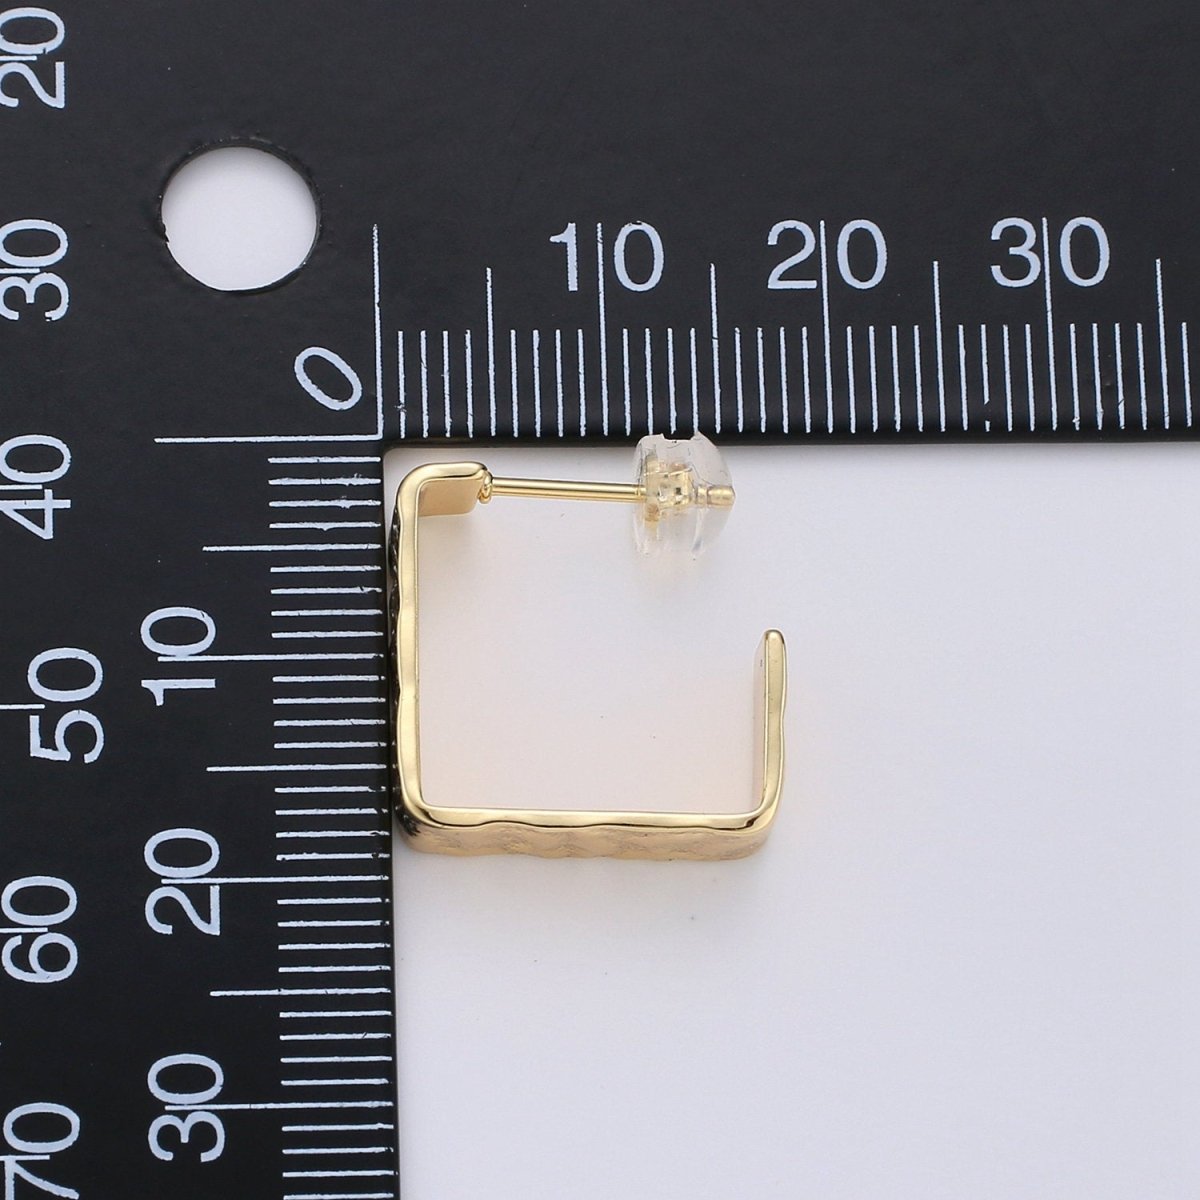 Gold earrings, Gold Square earrings, Hammered 14K gold filled simple everyday earrings Statement Minimalist Jewelry K-577 - DLUXCA